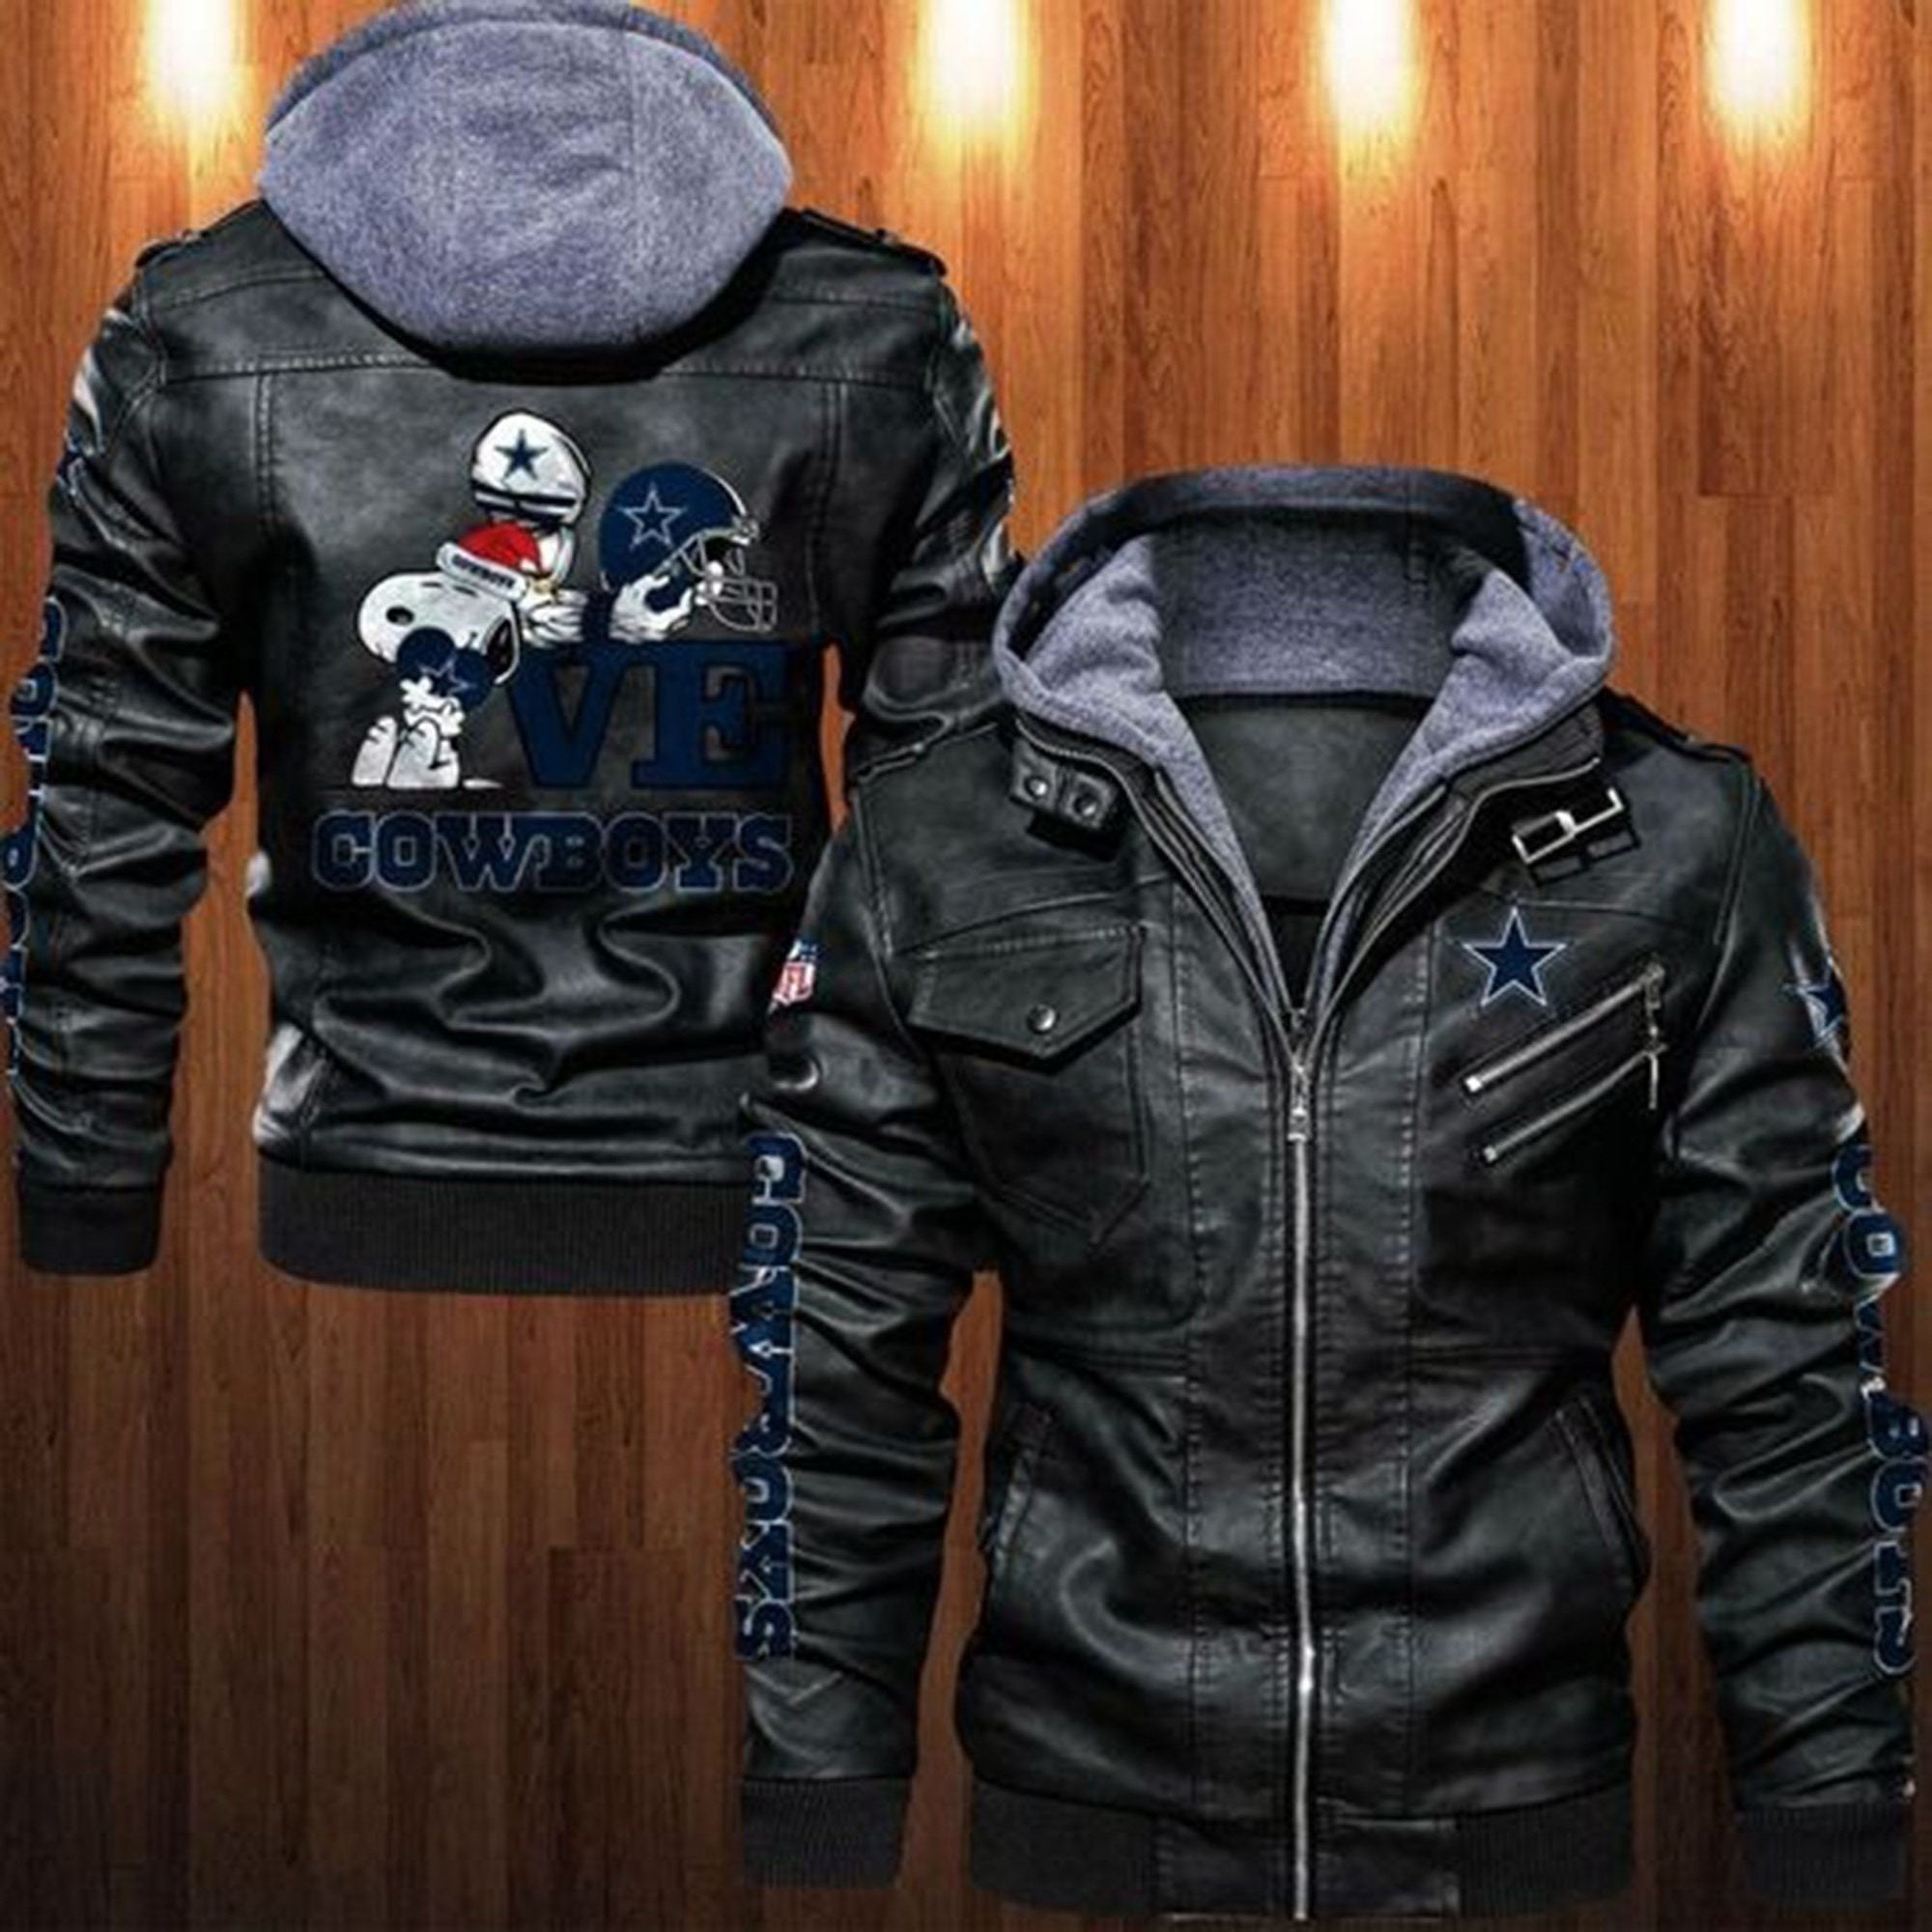 These Amazing Leather Jacket will add to the appeal of your outfit 179